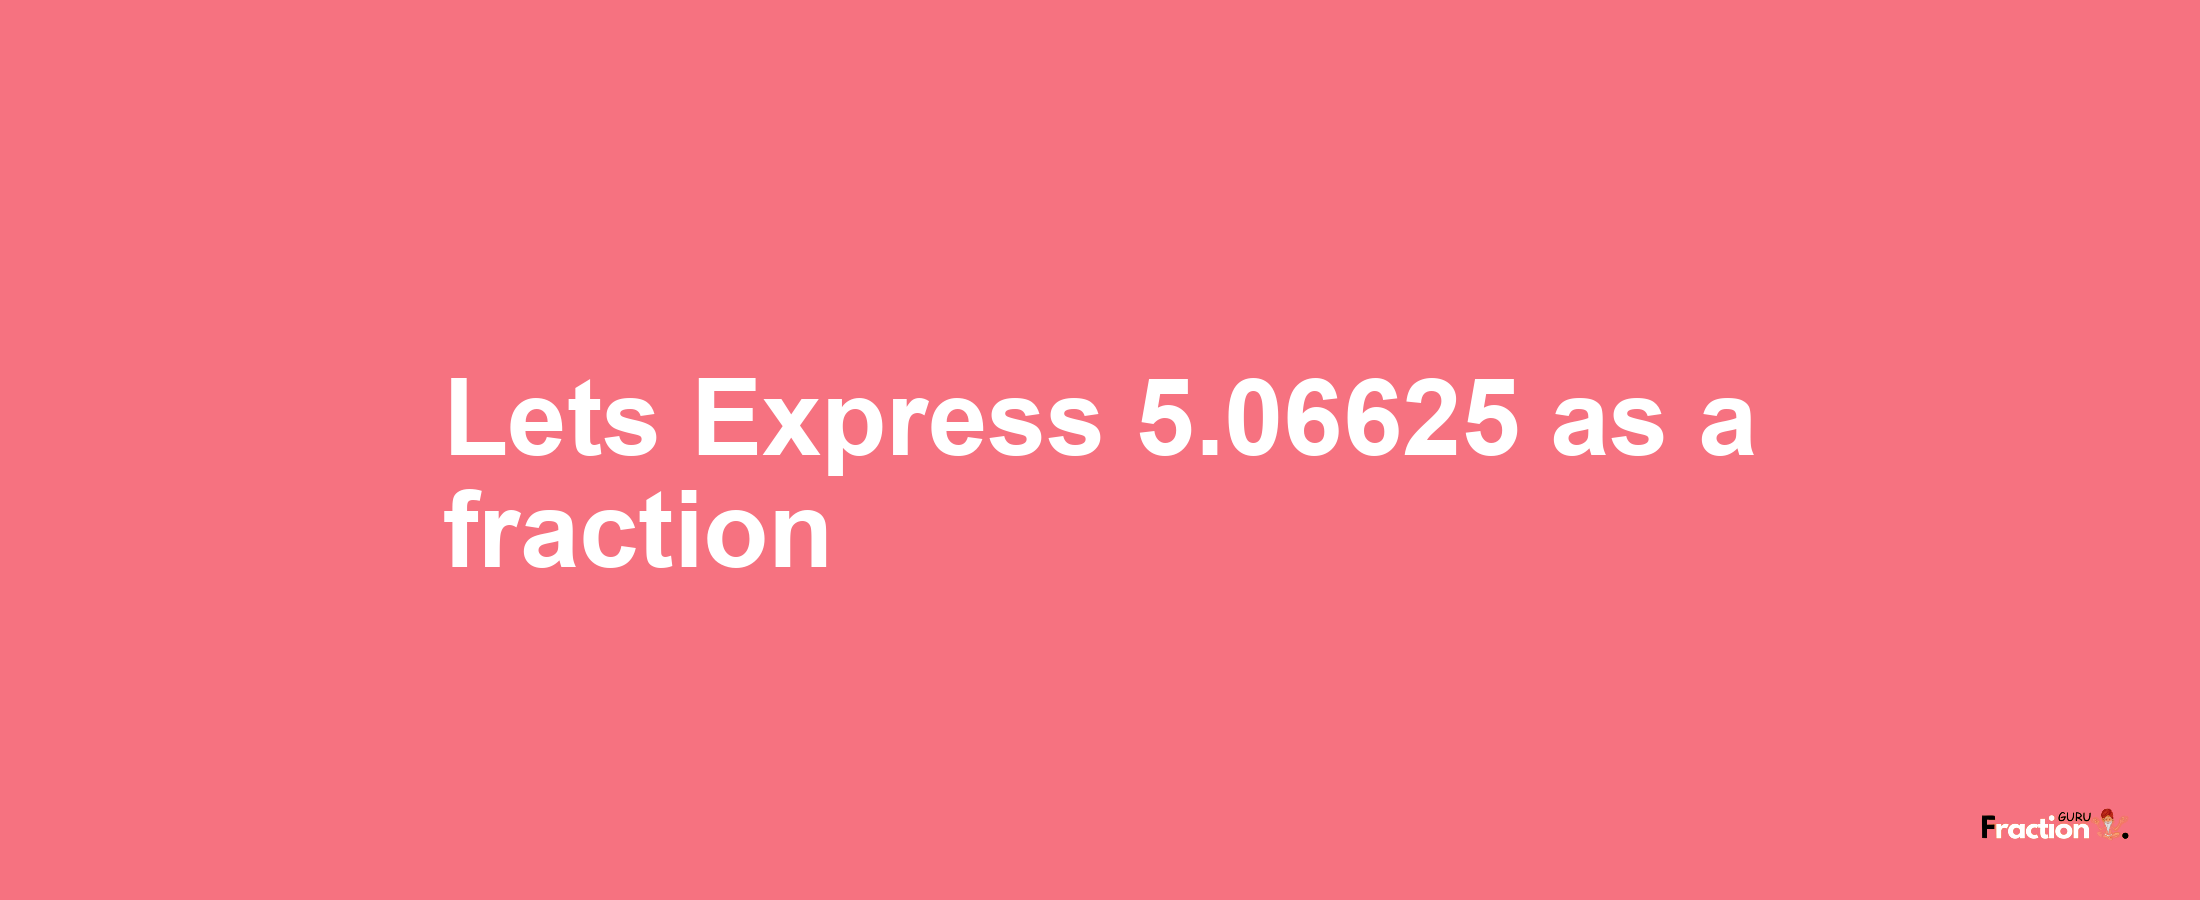 Lets Express 5.06625 as afraction